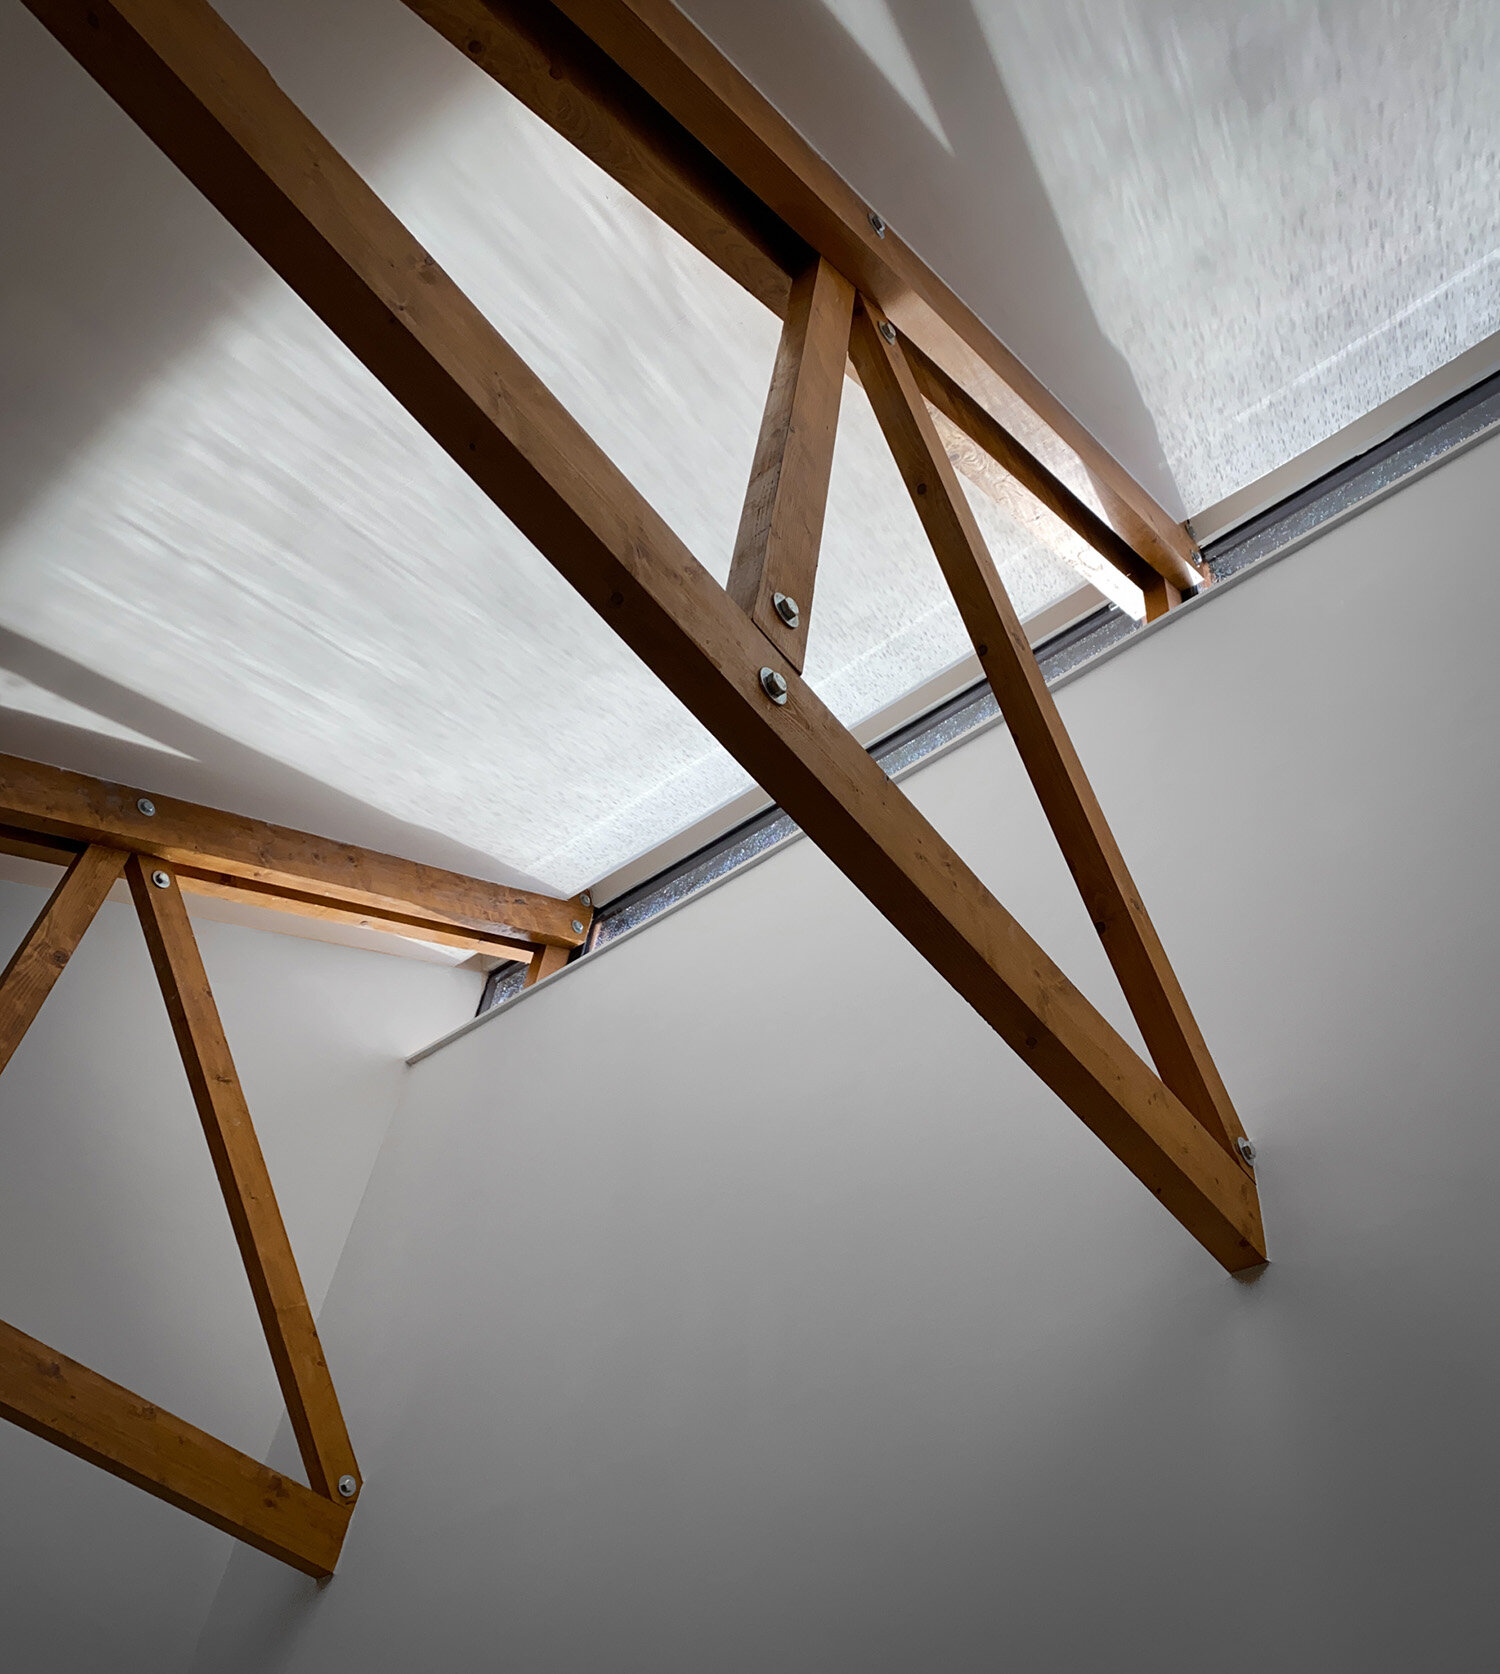 EAA-edinburgh-architectural-association-scotland-uk-awards-2020-Sonis-Browse-Architects-Trusses and clearstorey windows.jpg